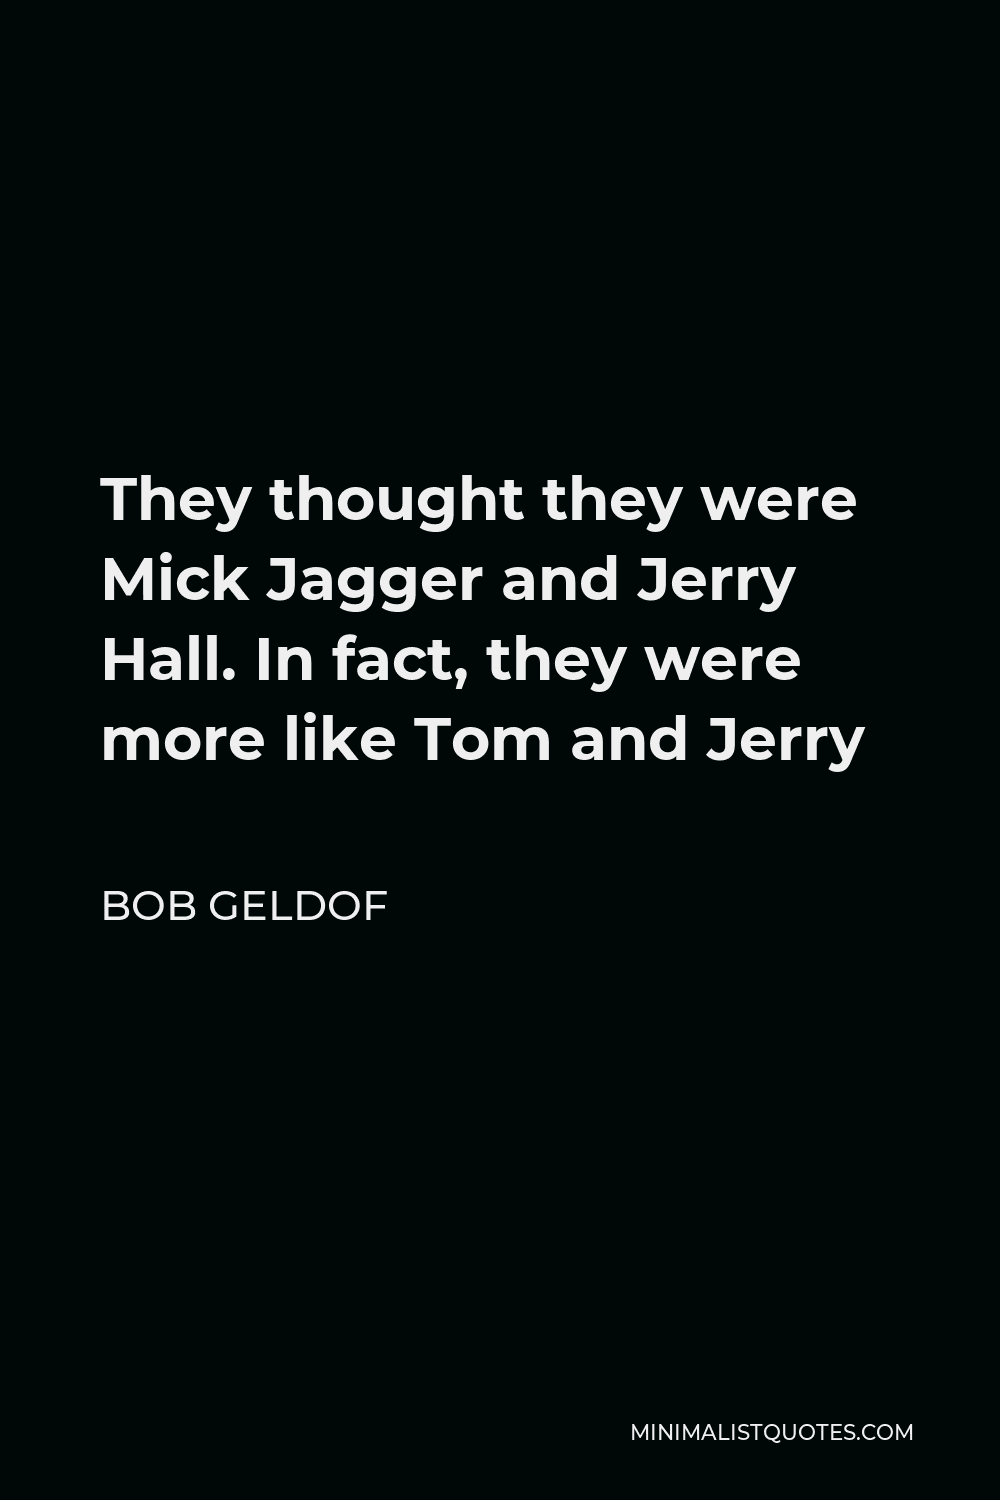 Bob Geldof Quote - They thought they were Mick Jagger and Jerry Hall. In fact, they were more like Tom and Jerry